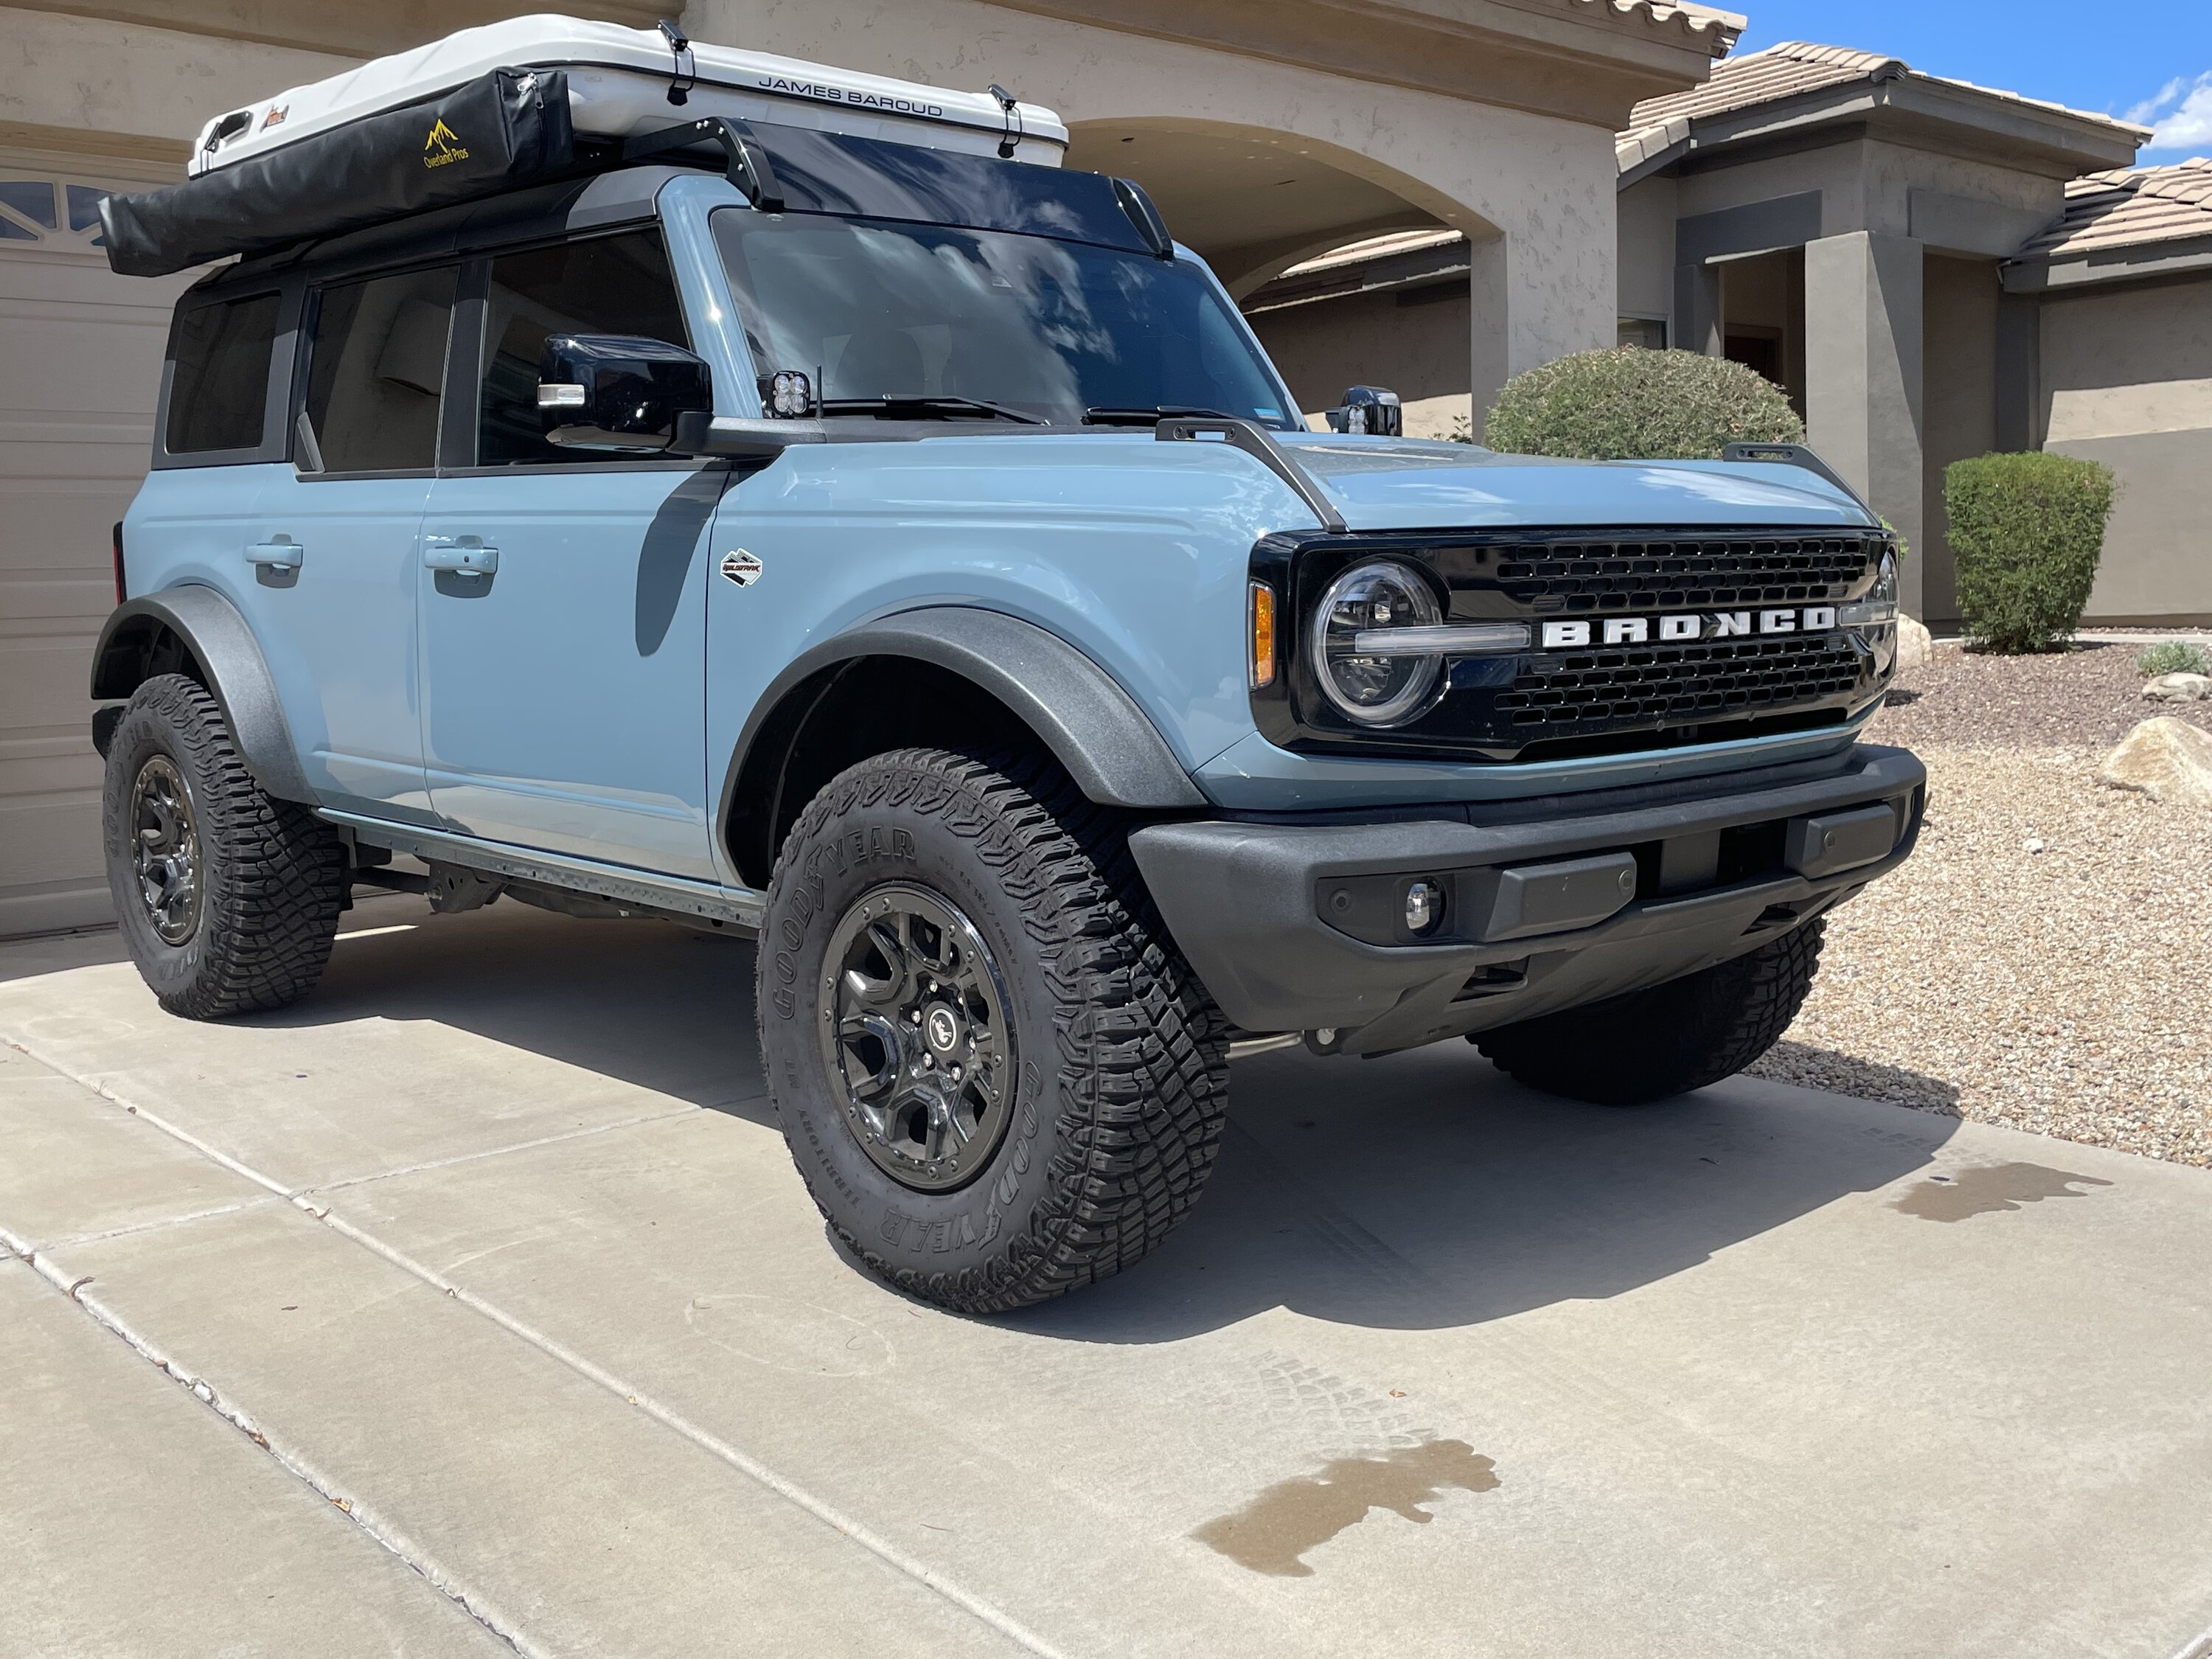 Ford Bronco Let's see your roof-top Tents and camping setups! passenger passthru and air connector